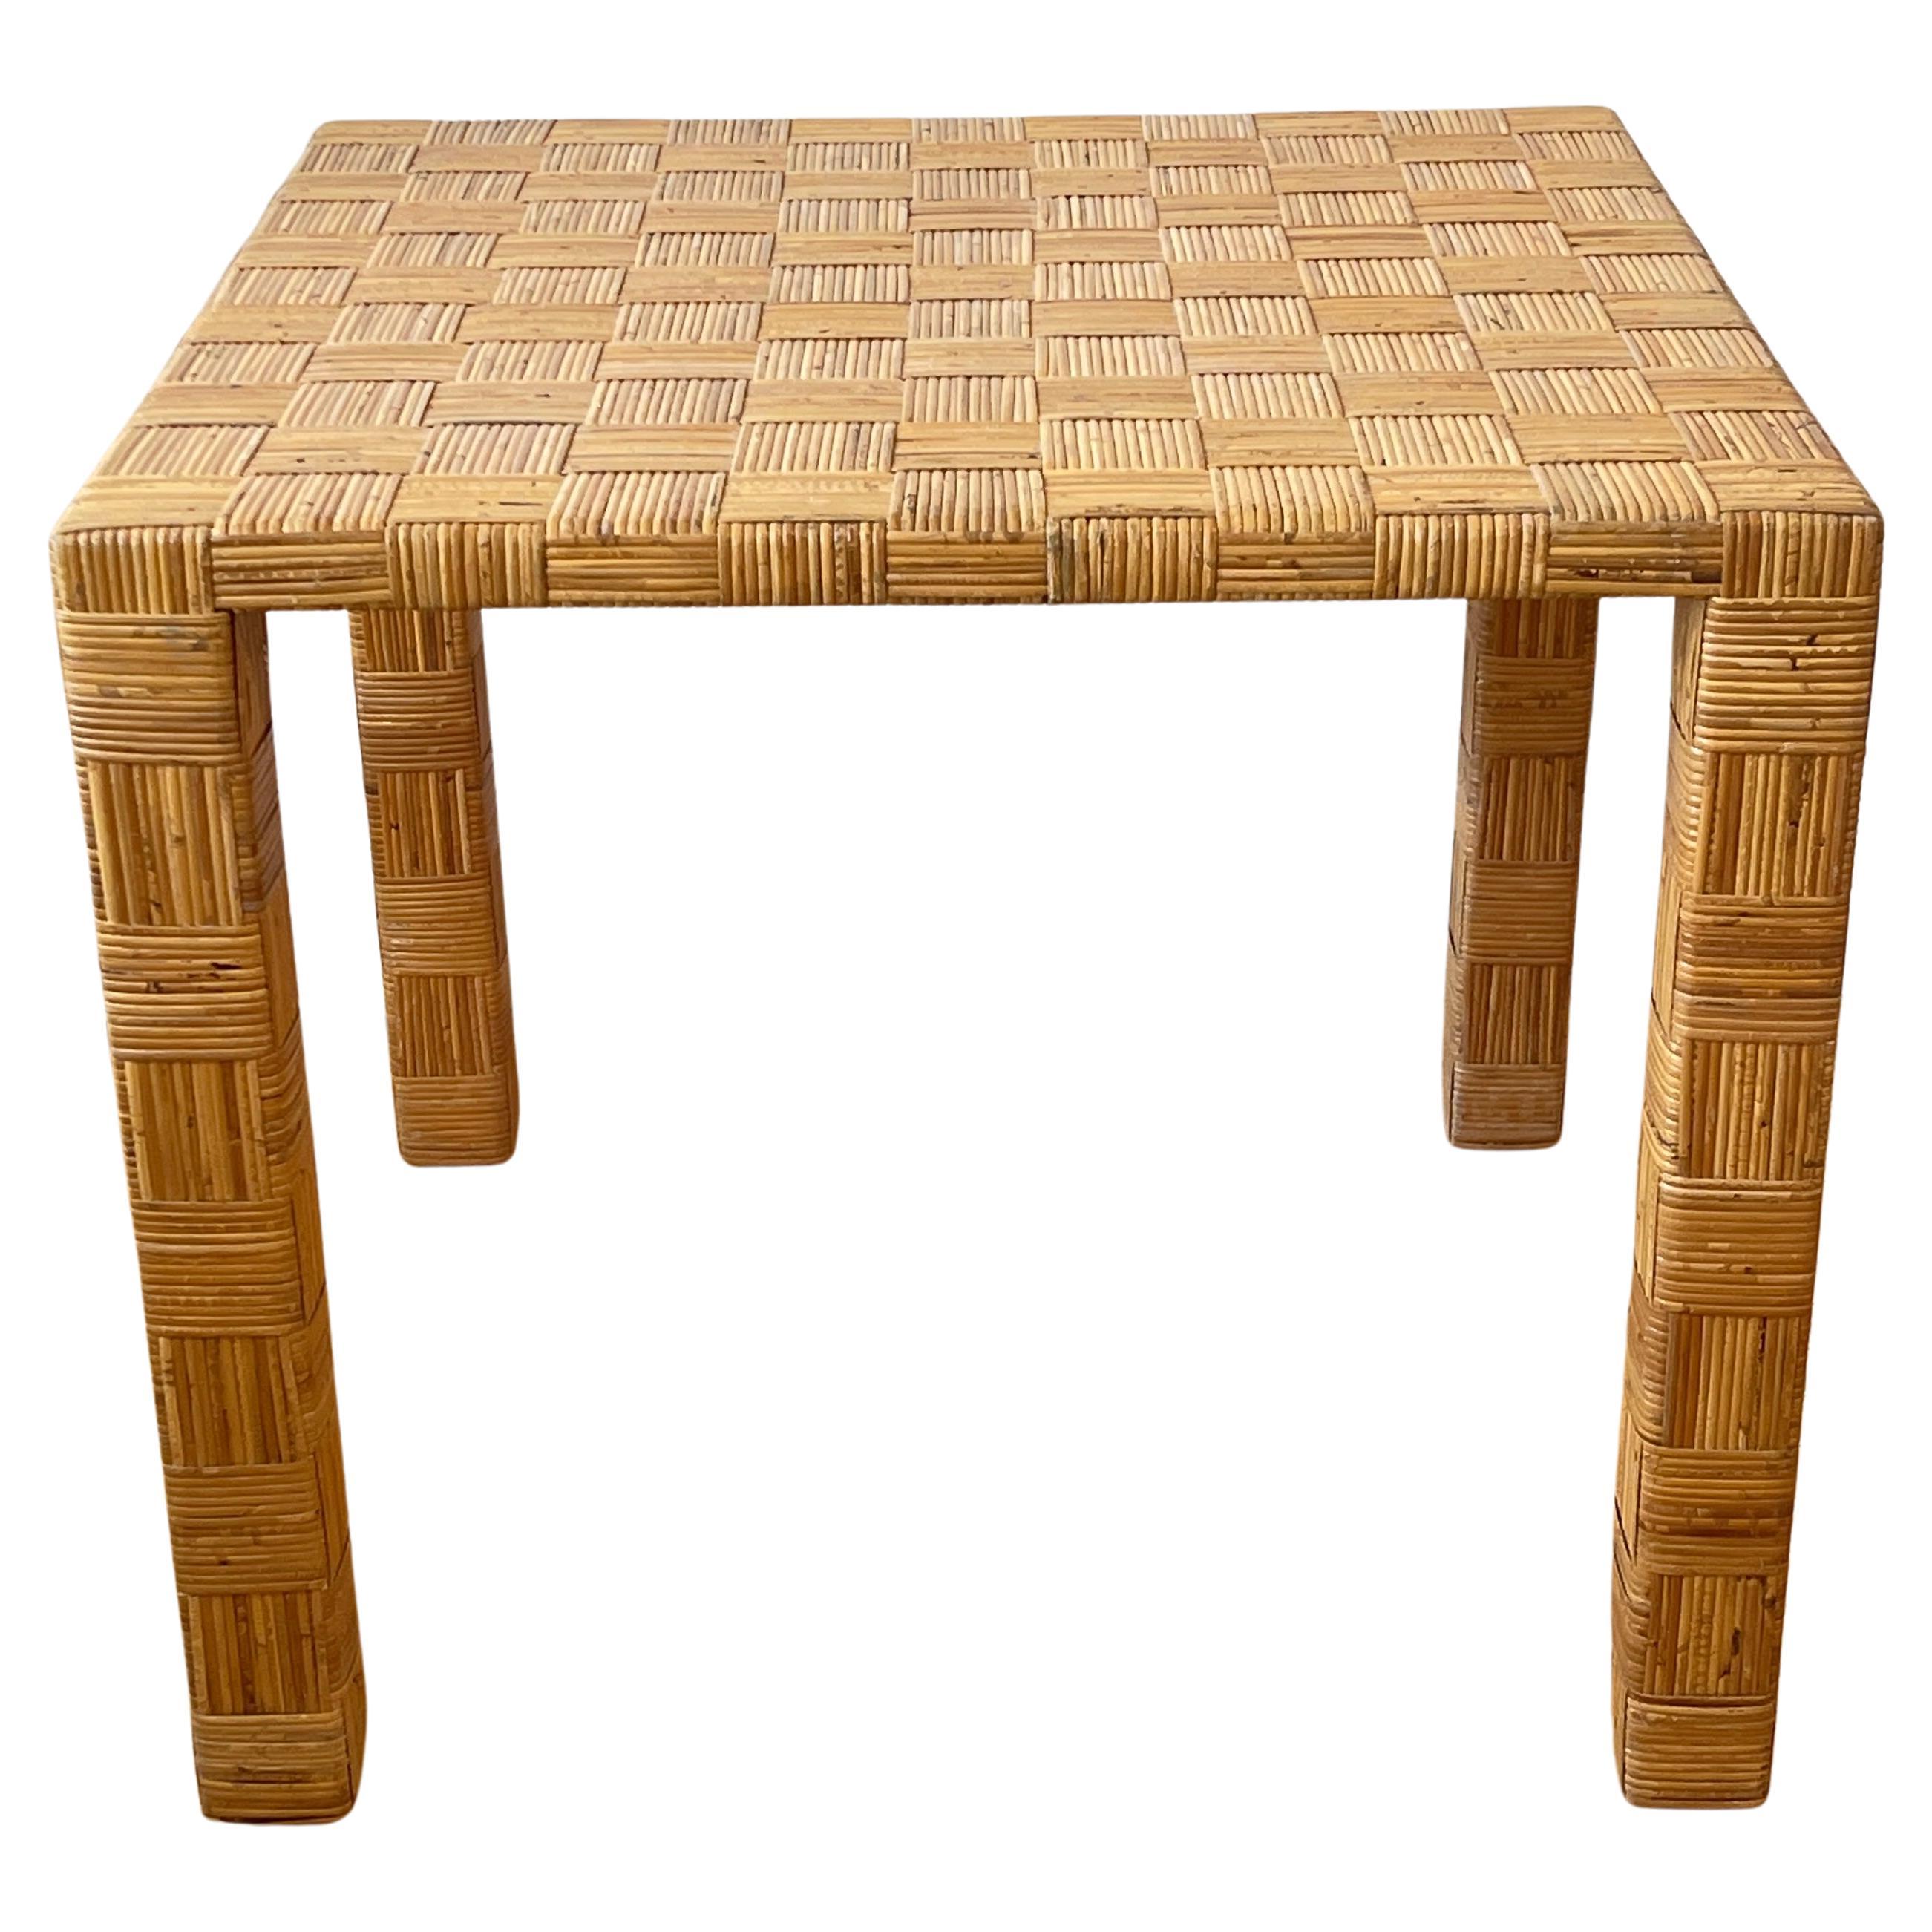 Harvey Probber 'Artisan' Woven Cane Game or Small Dining Table